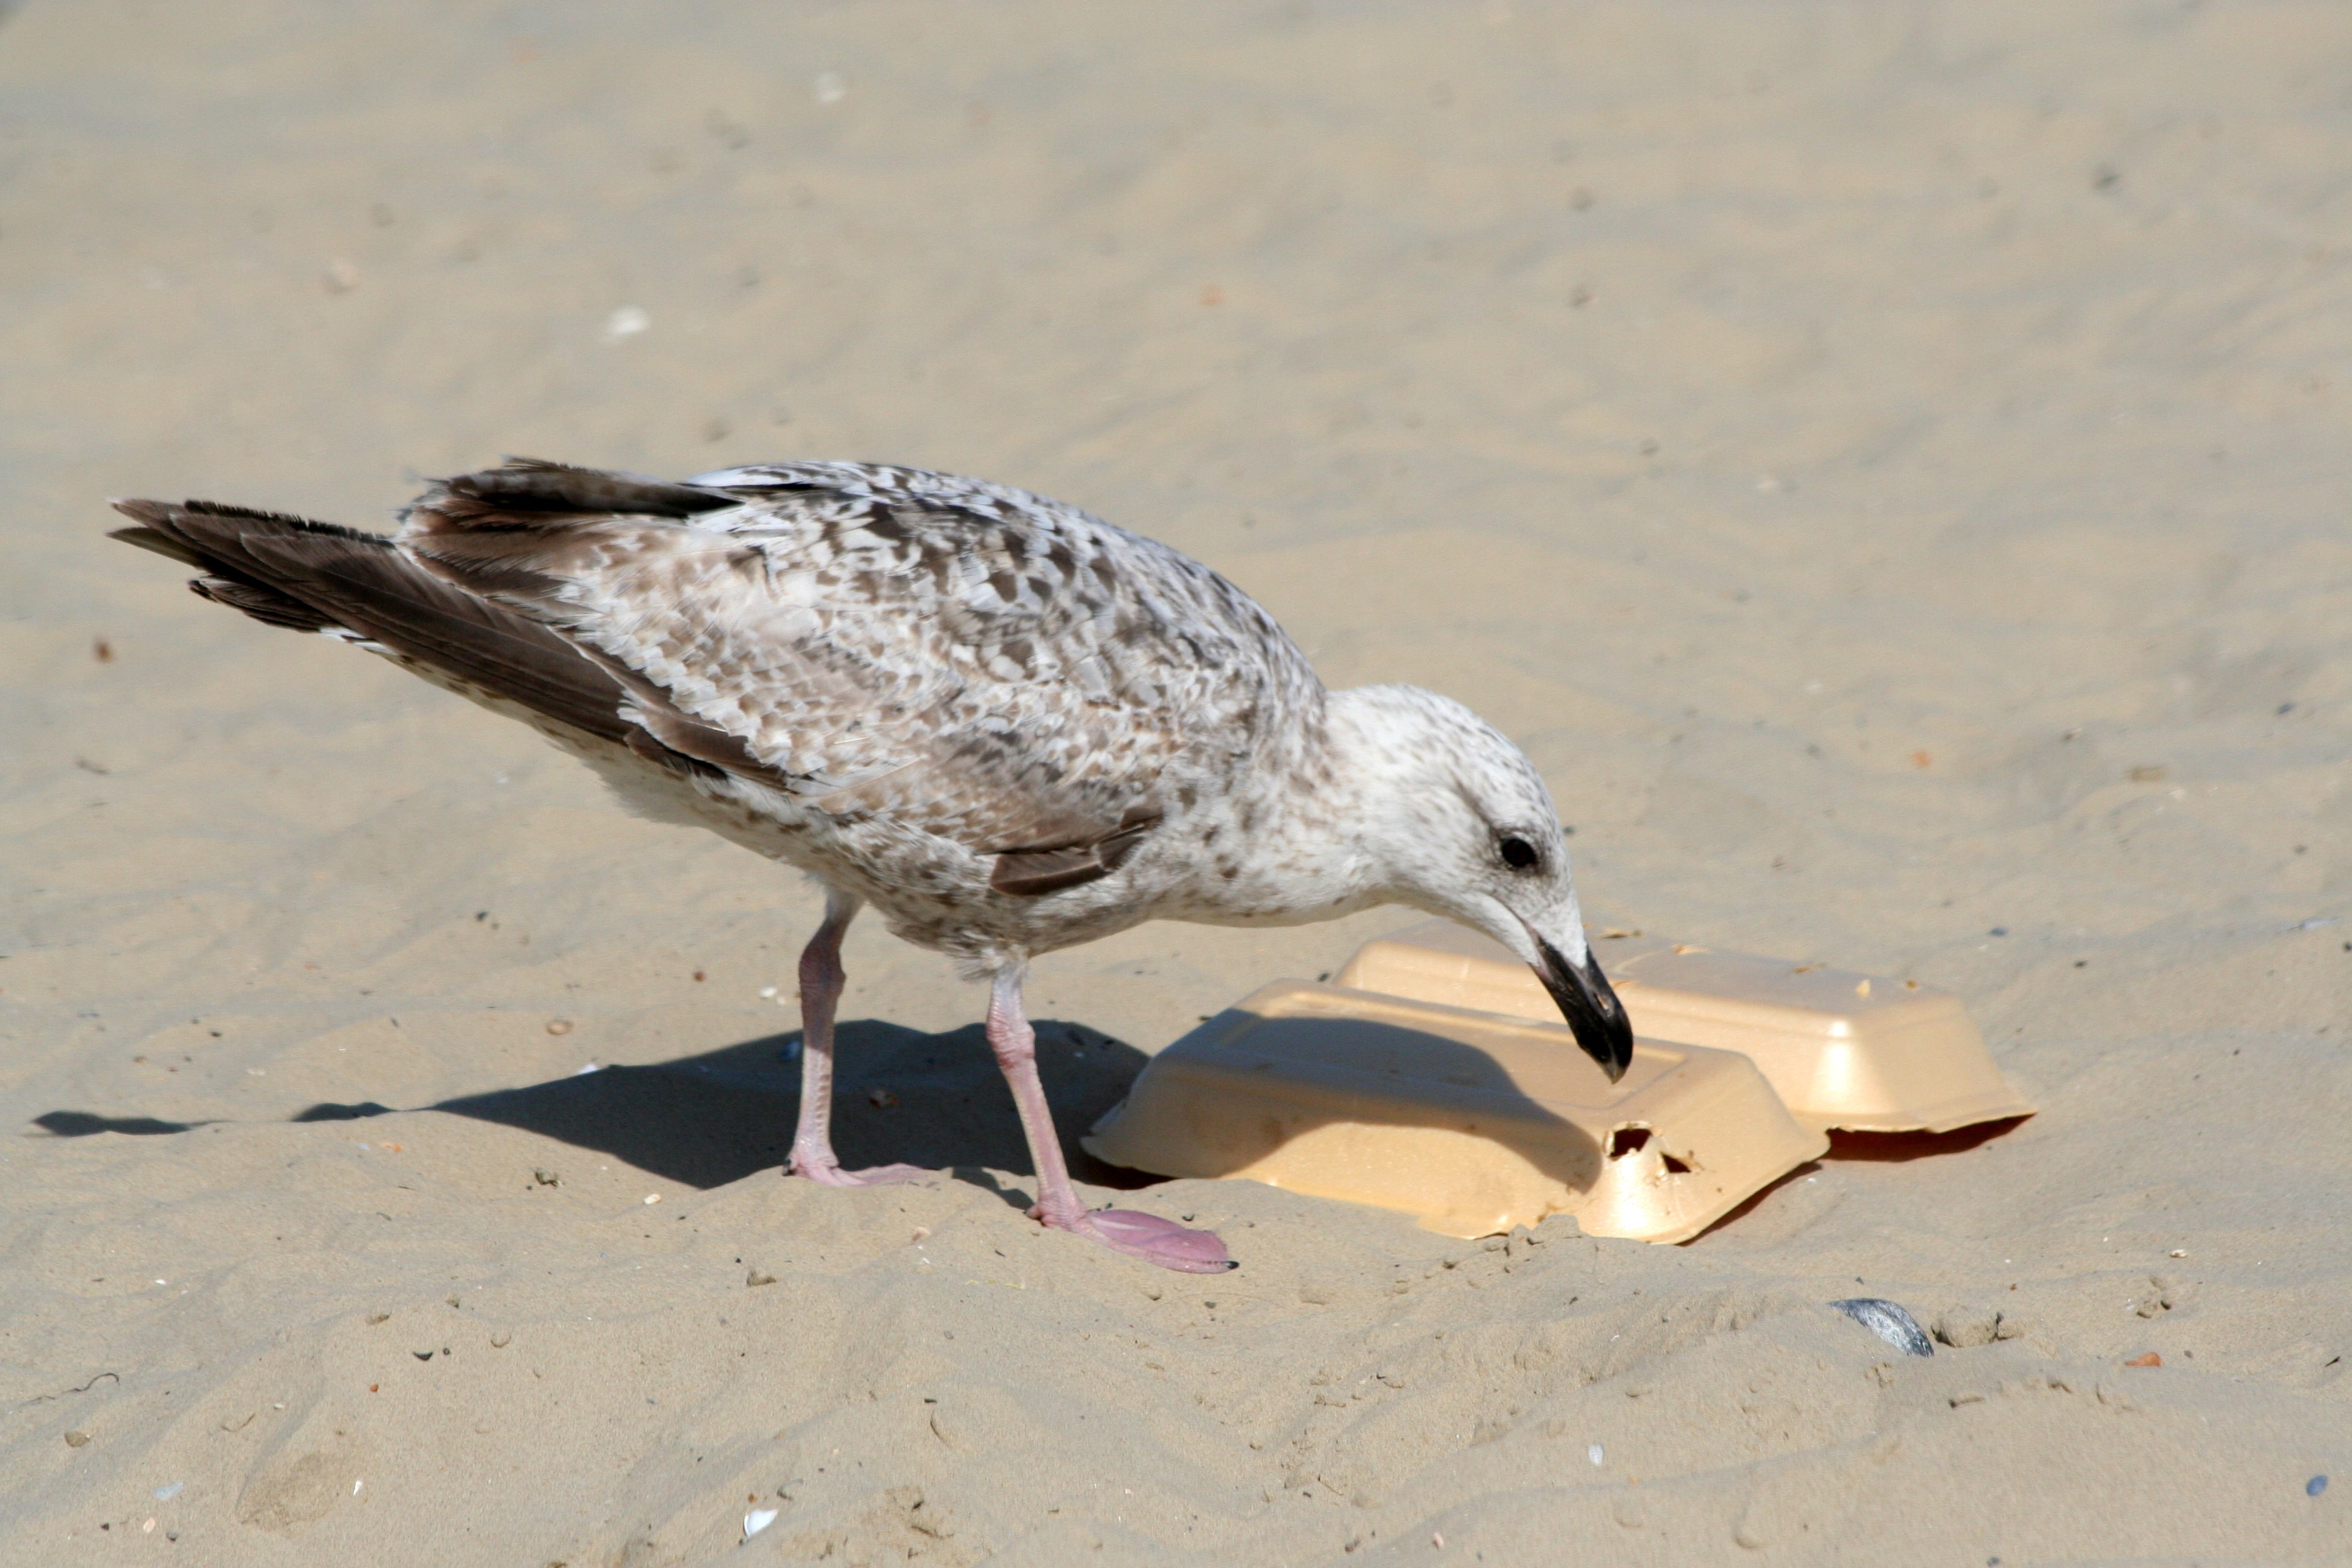 Seagull pecking at takeaway container on beach